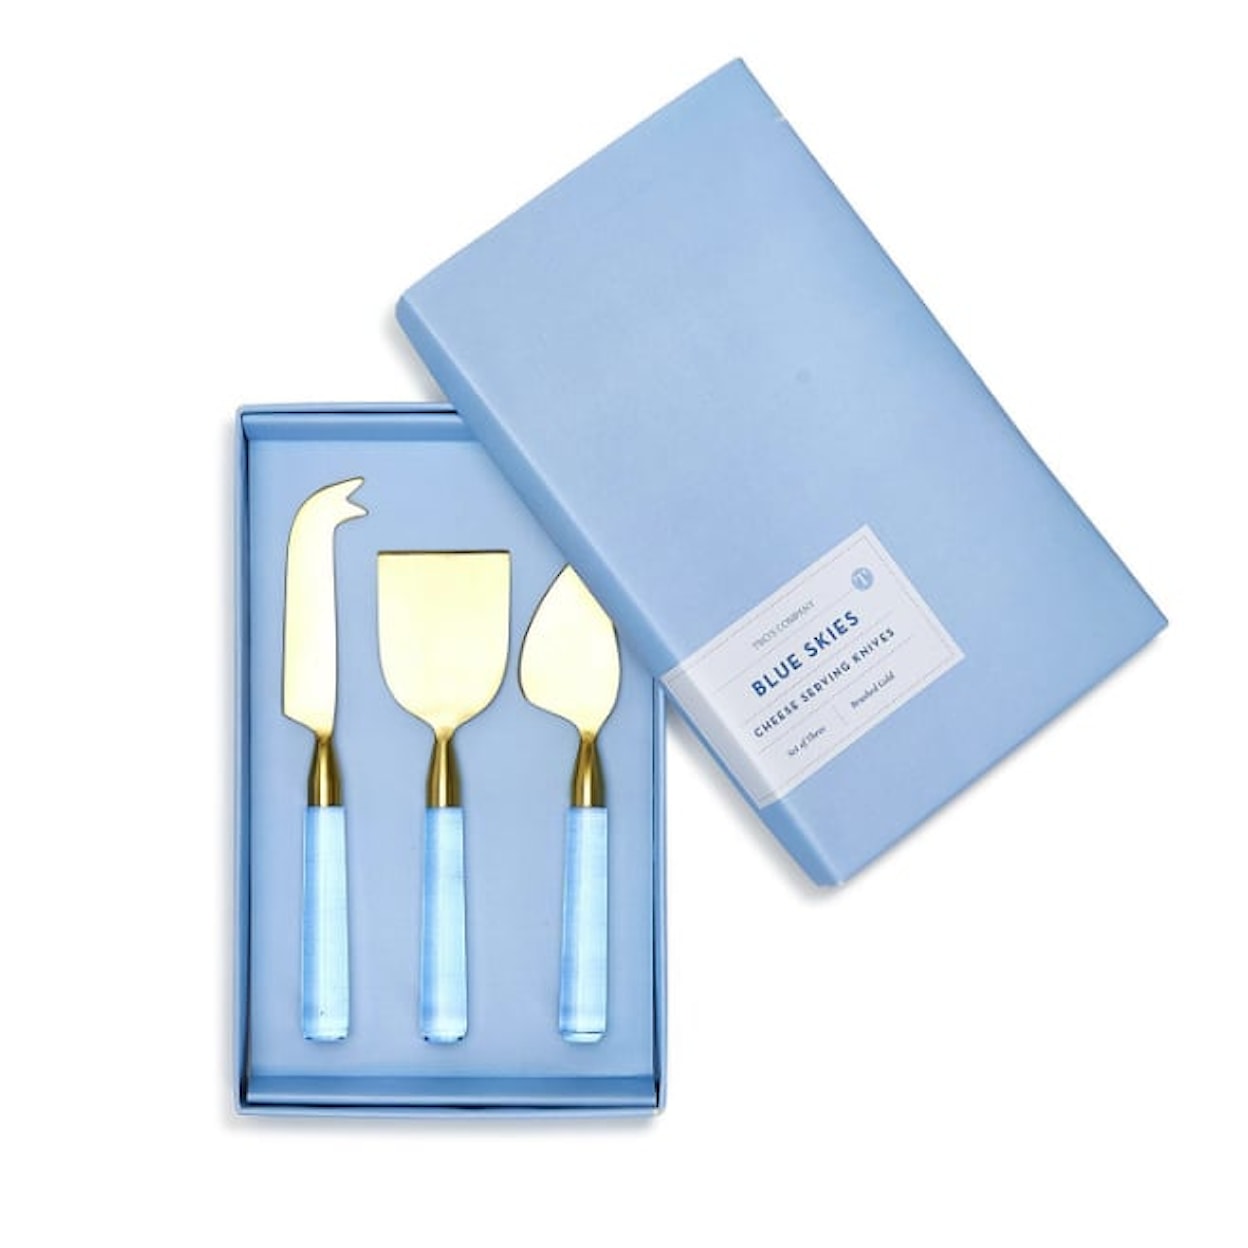 Two's Company Hydrangea BLUE SKIES S/3 CHEESE KNIVES IN GIFT BOX